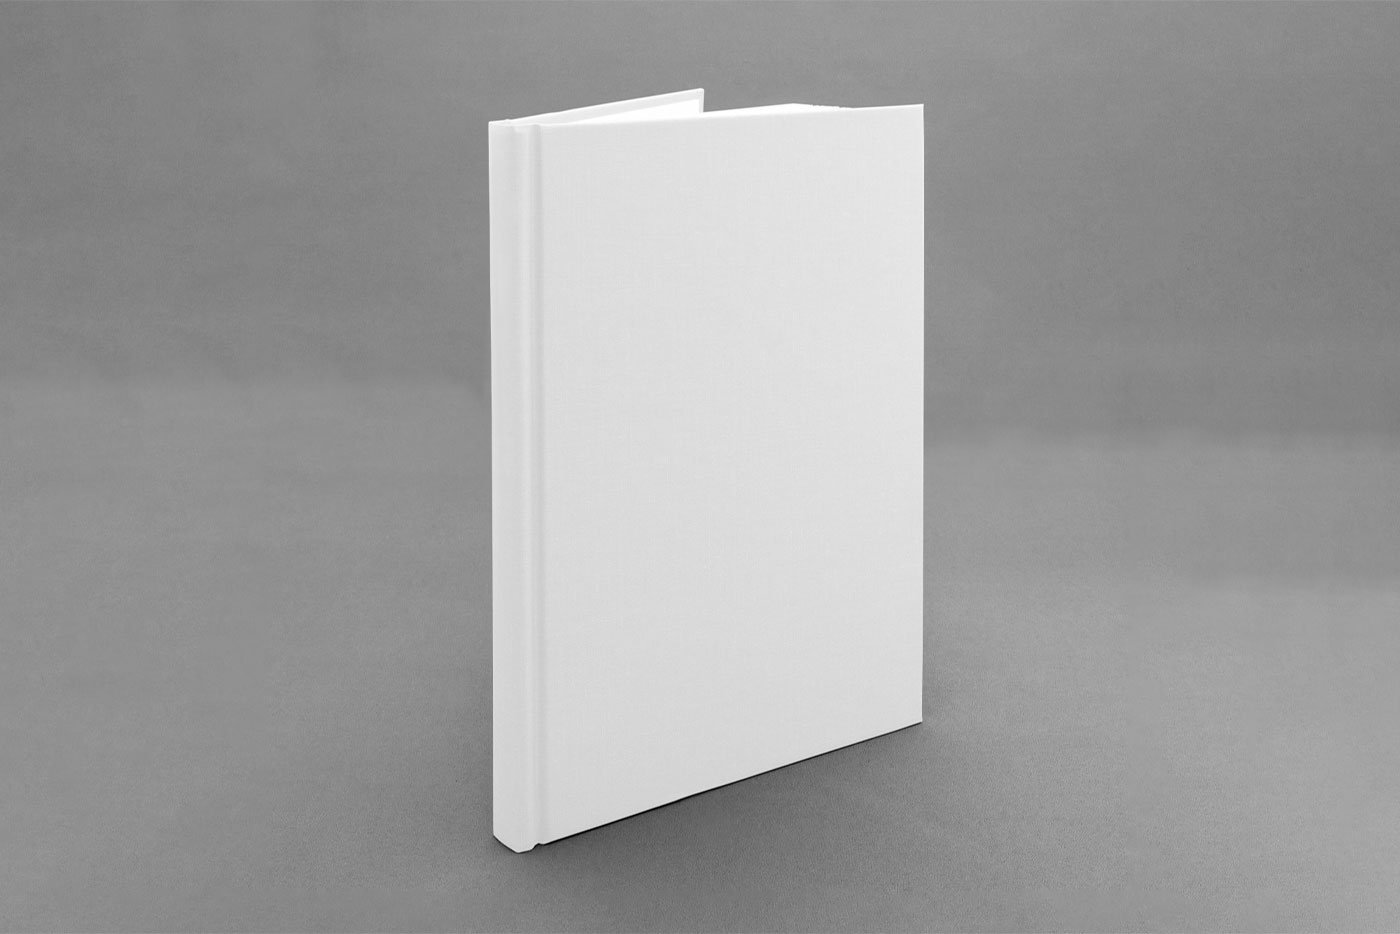 Standing Open Notebook Cover Mockup FREE PSD